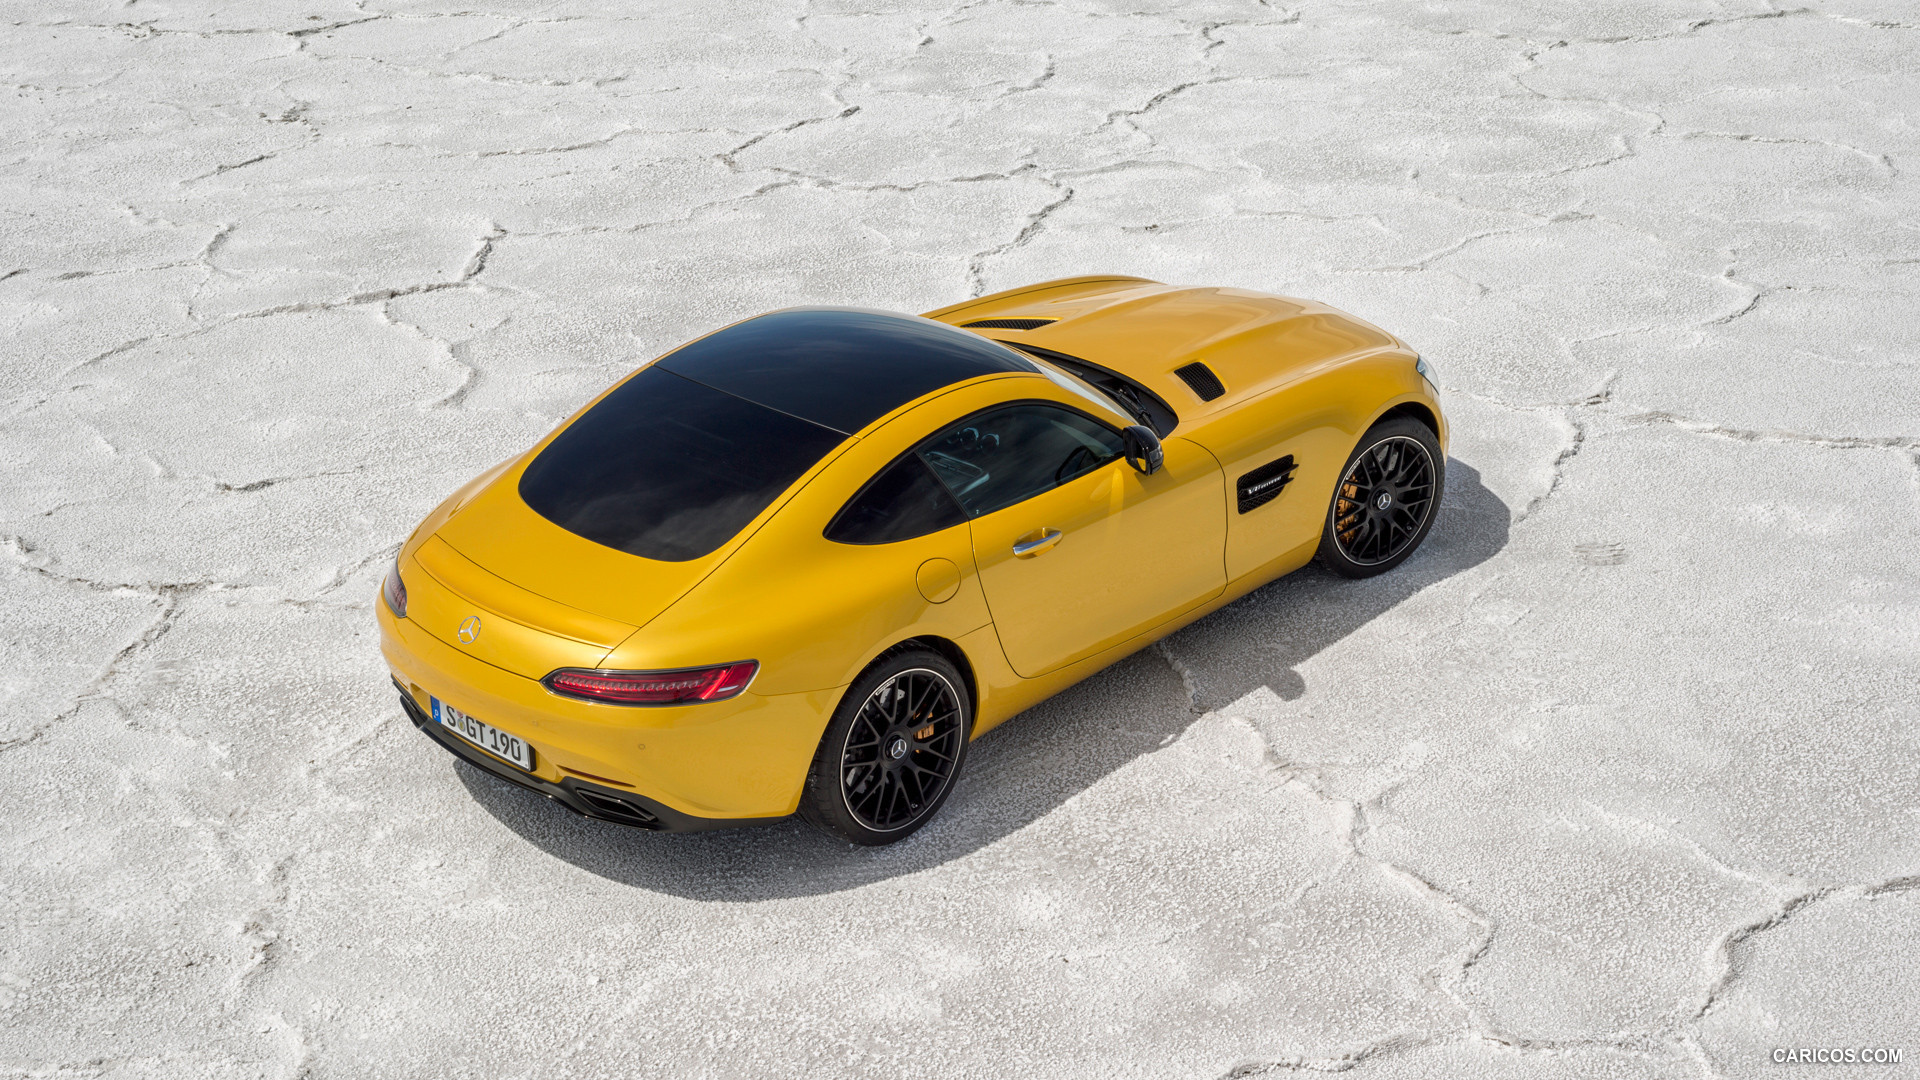 2016 Mercedes-AMG GT (Solarbeam) - Top, #74 of 190